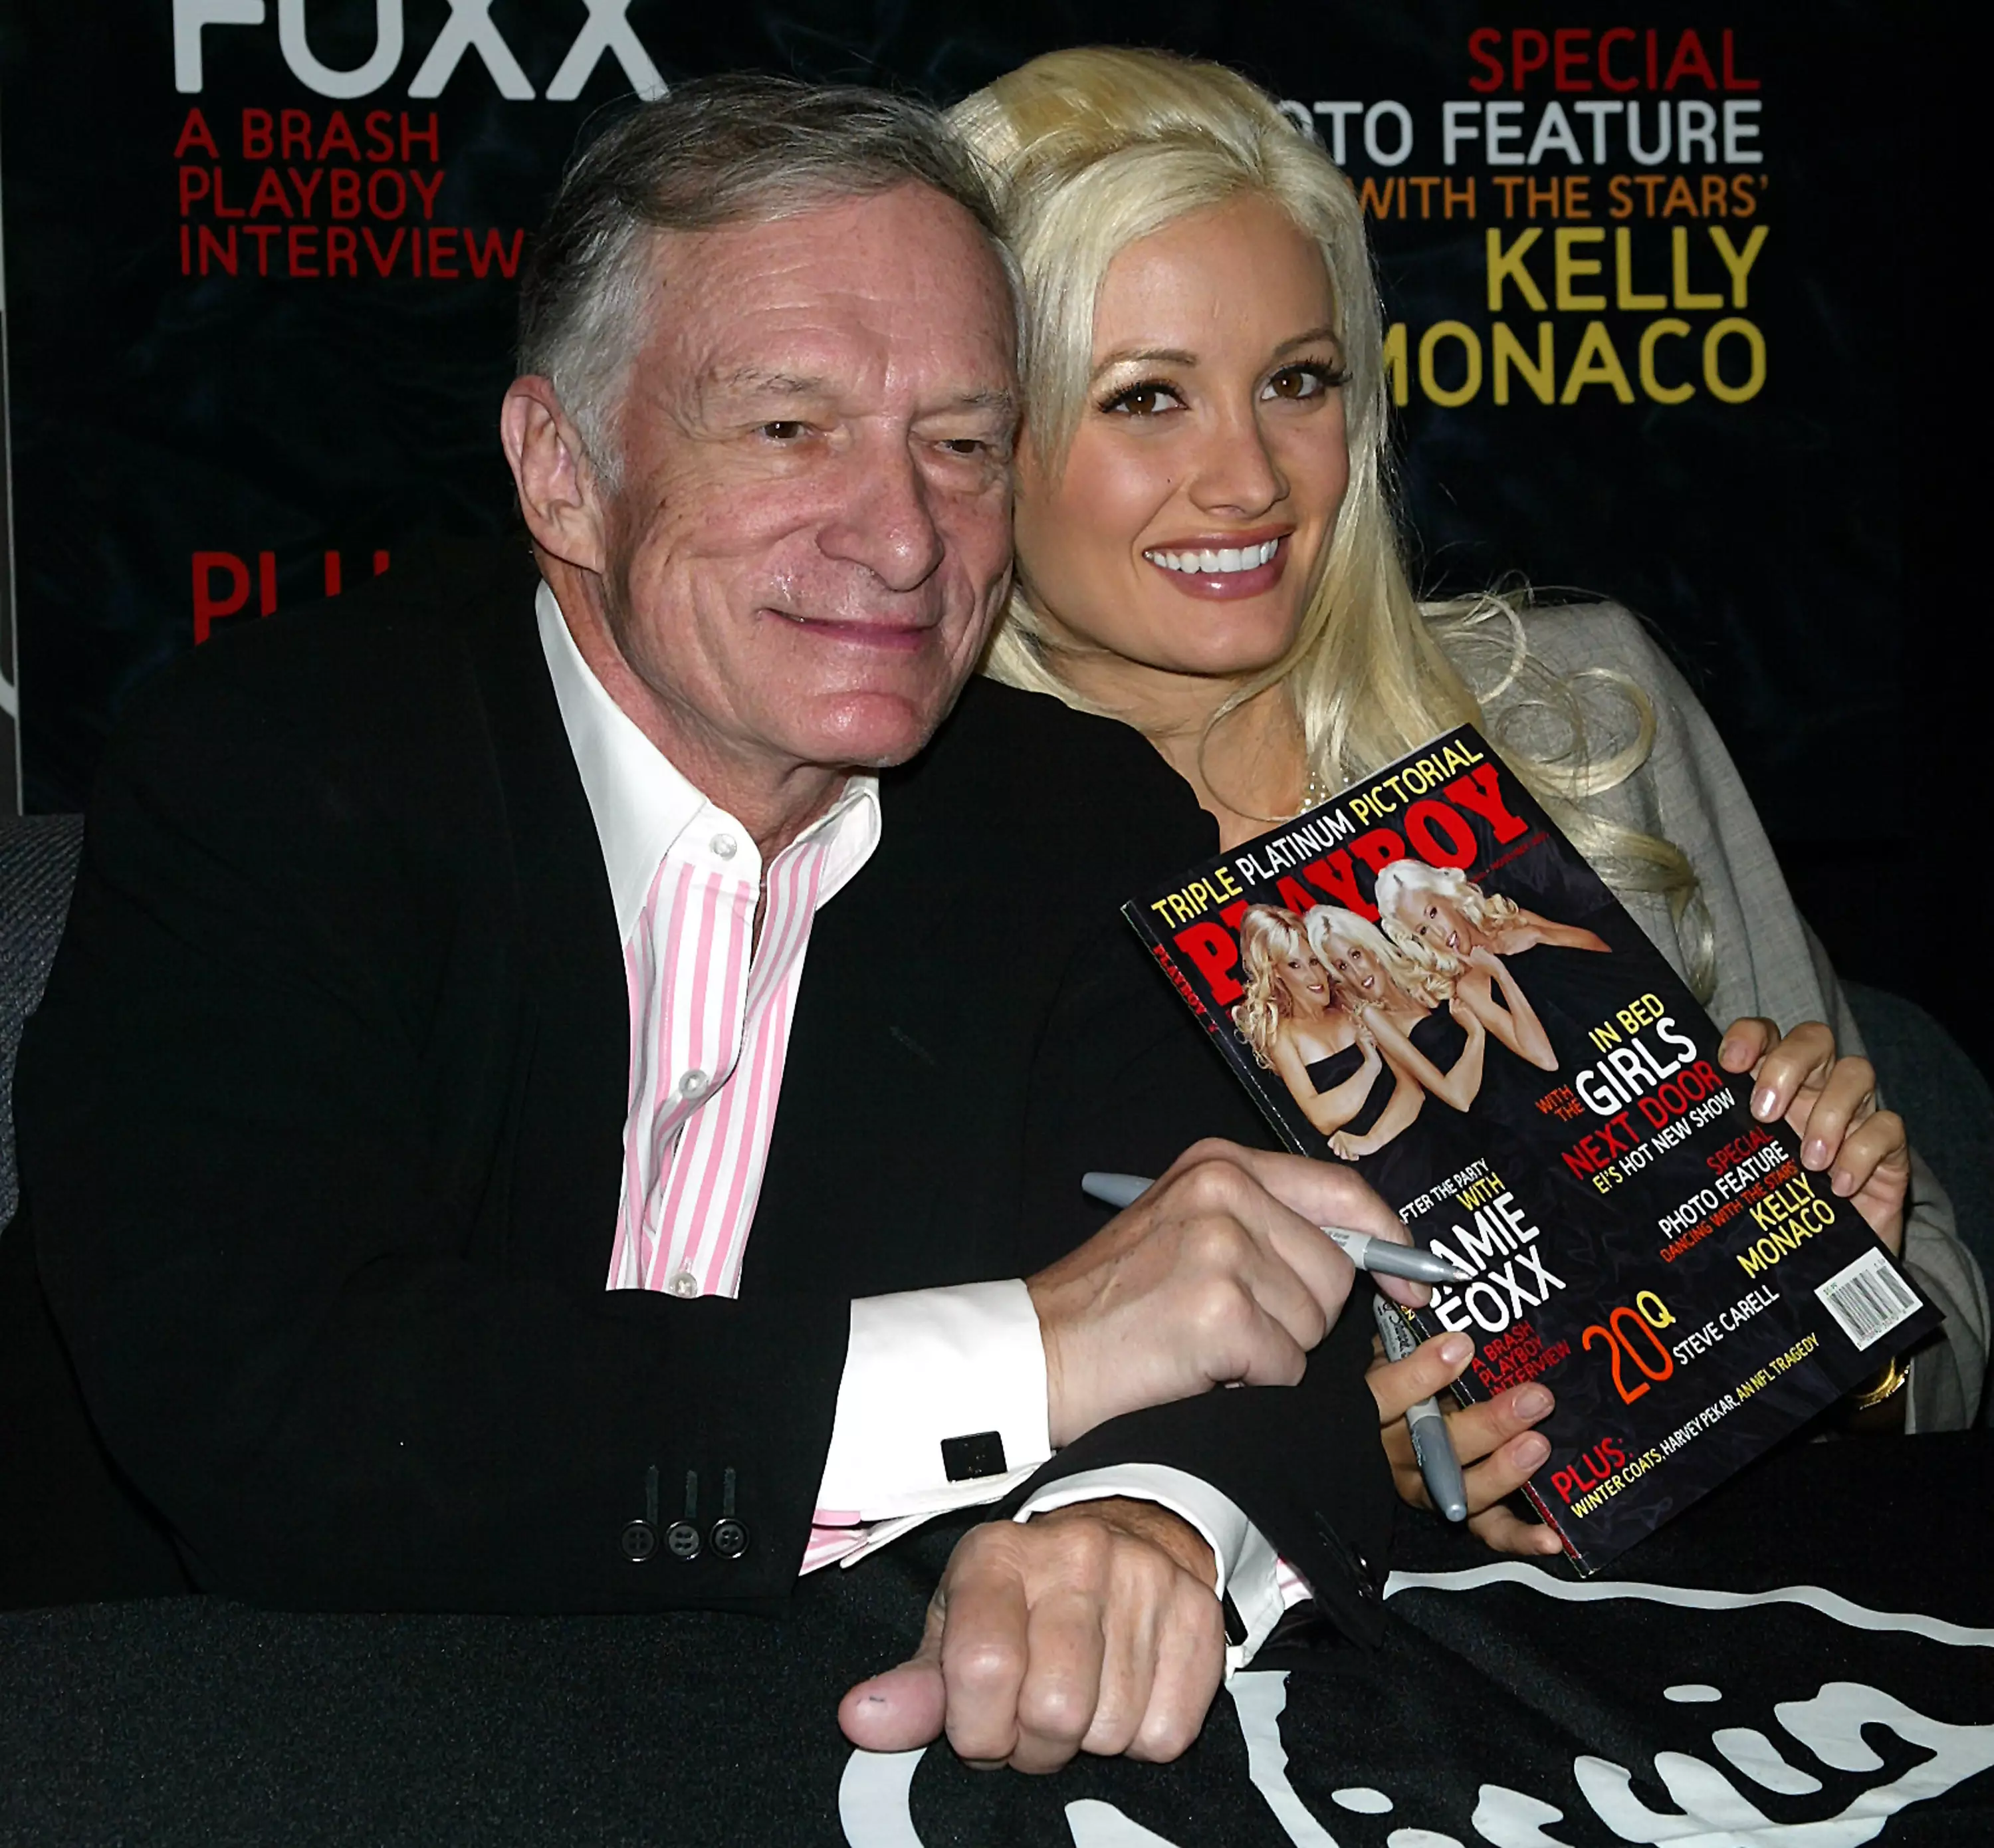 Some of Hugh Heffner's belongings are being auctioned off, including the first issue of Playboy.